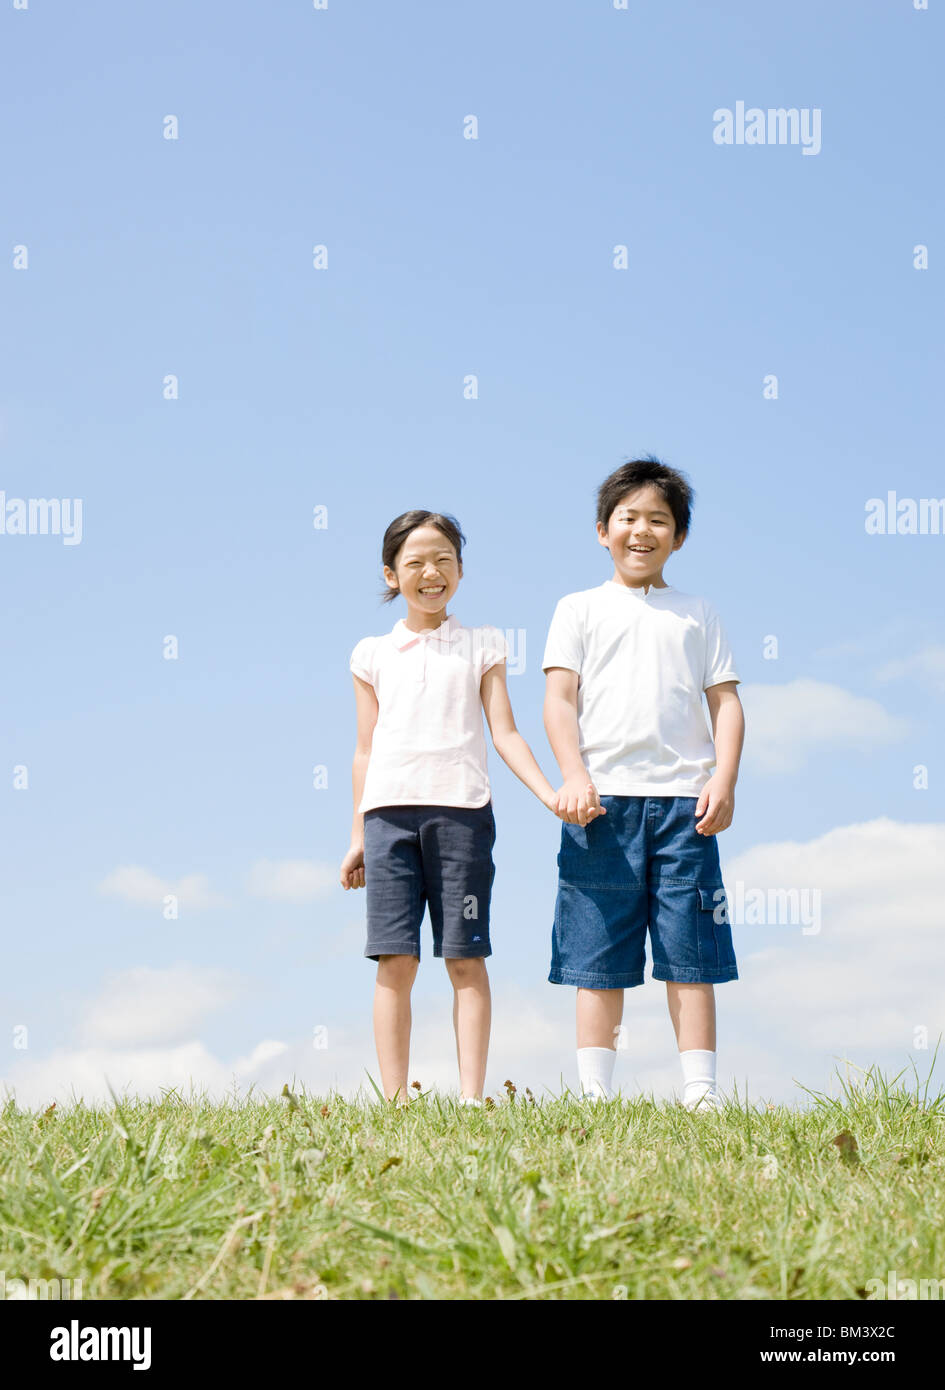 Boy and Girl Holding Hands Under Blue Sky Stock Photo